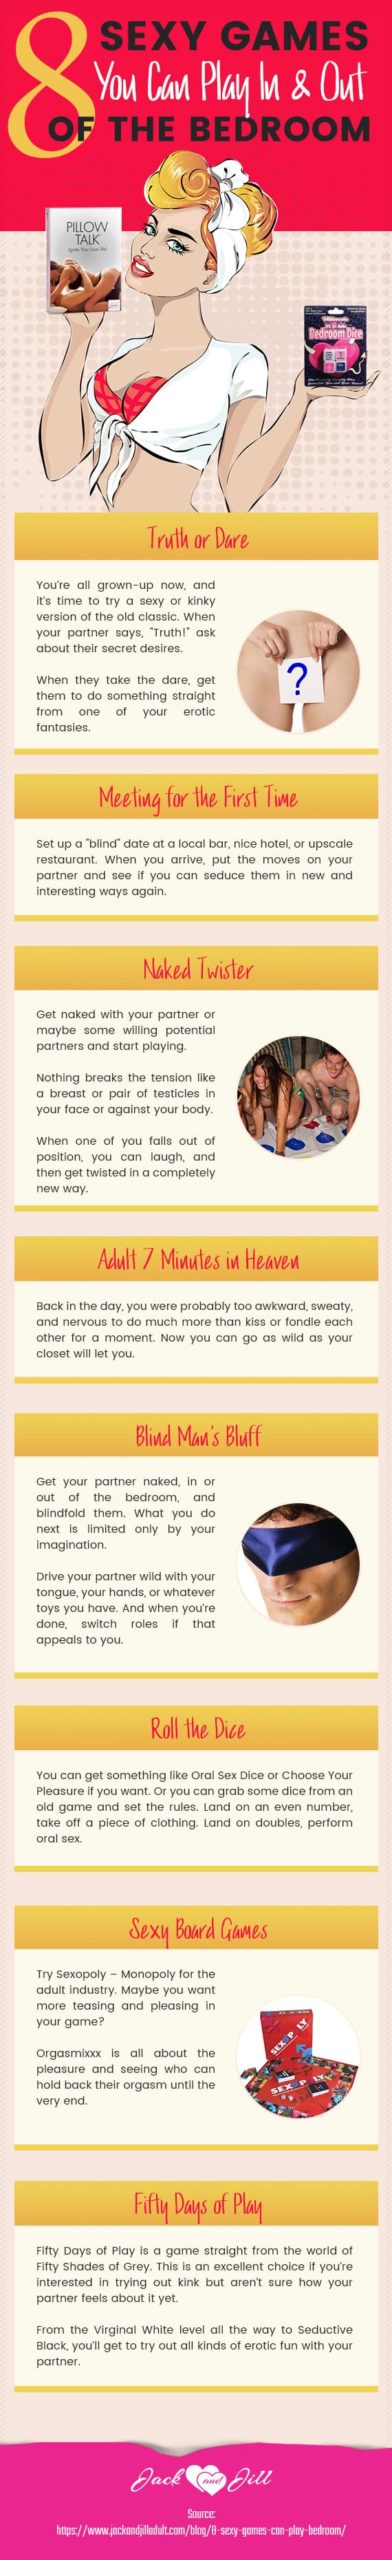 Infographic for 8 Sexy Games You Can Play In and Out of the Bedroom